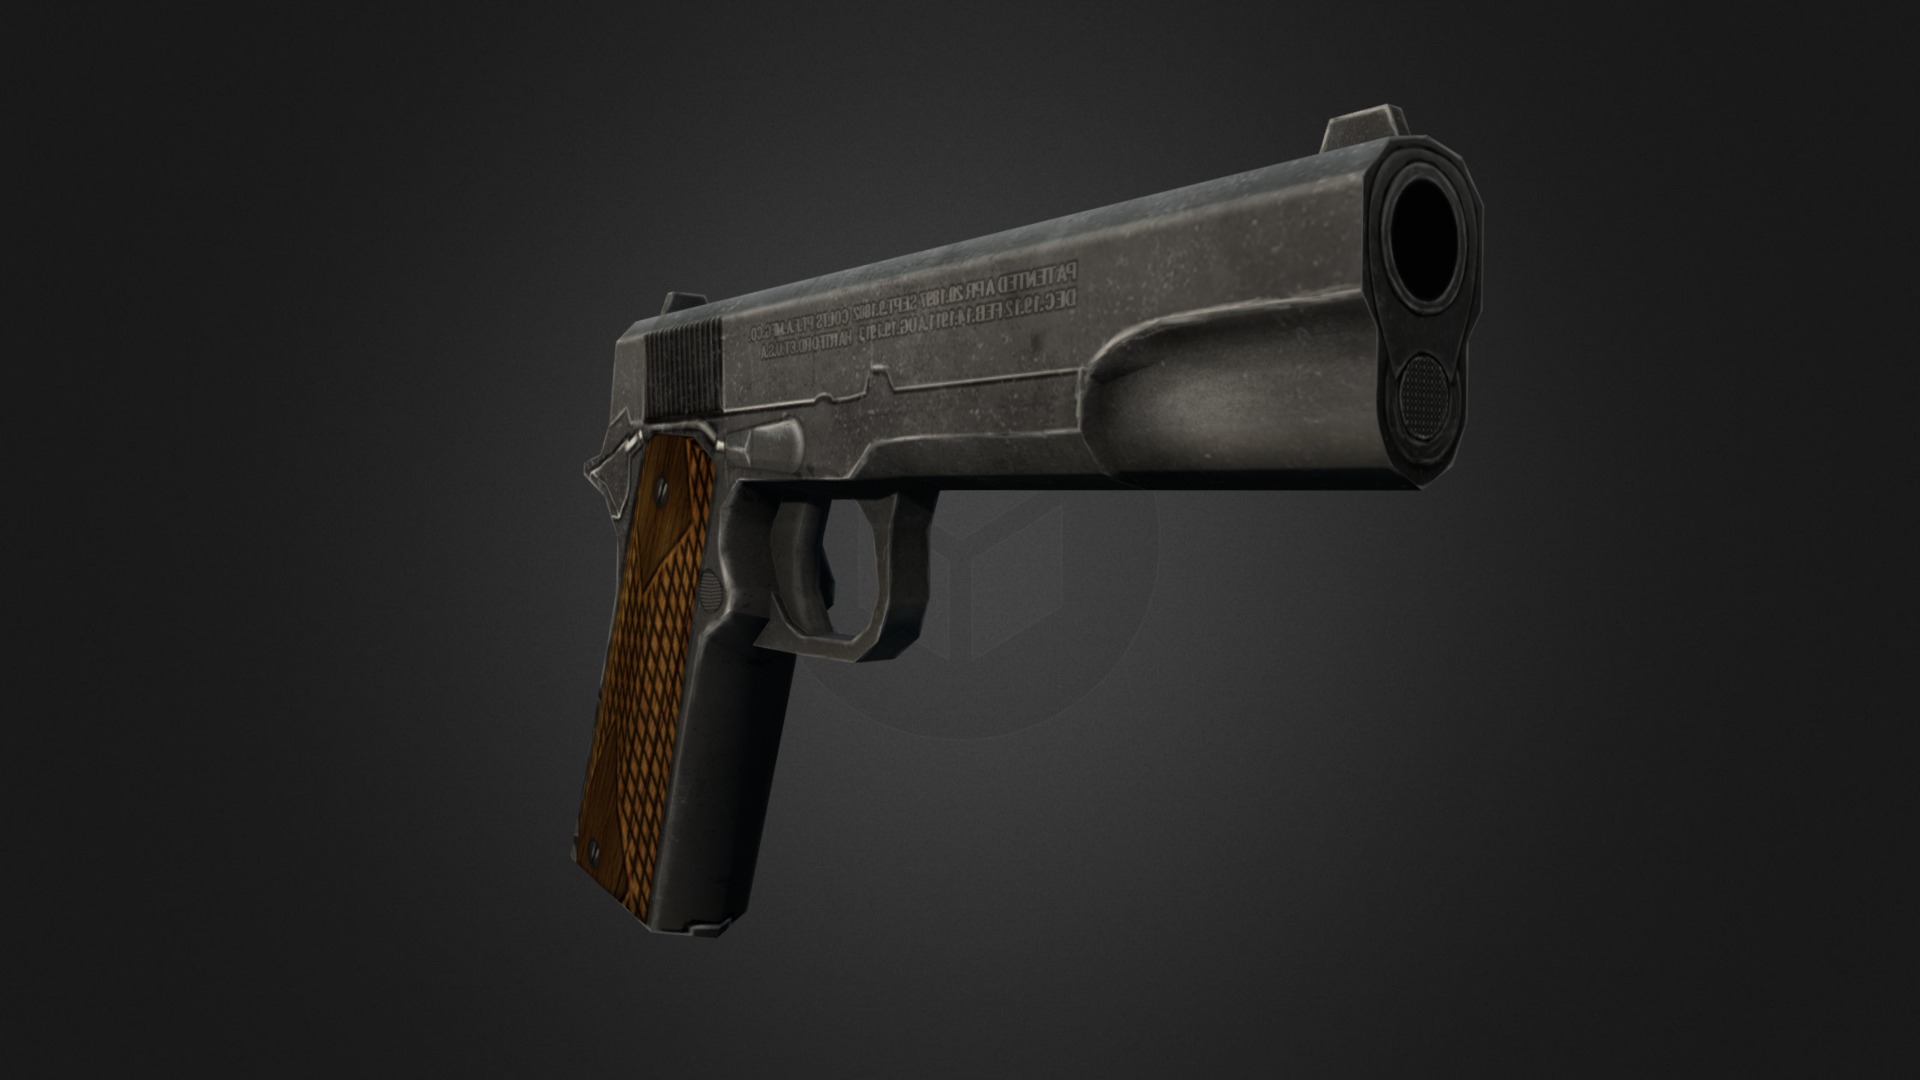 3D model Colt - This is a 3D model of the Colt. The 3D model is about a silver handgun with a black background.